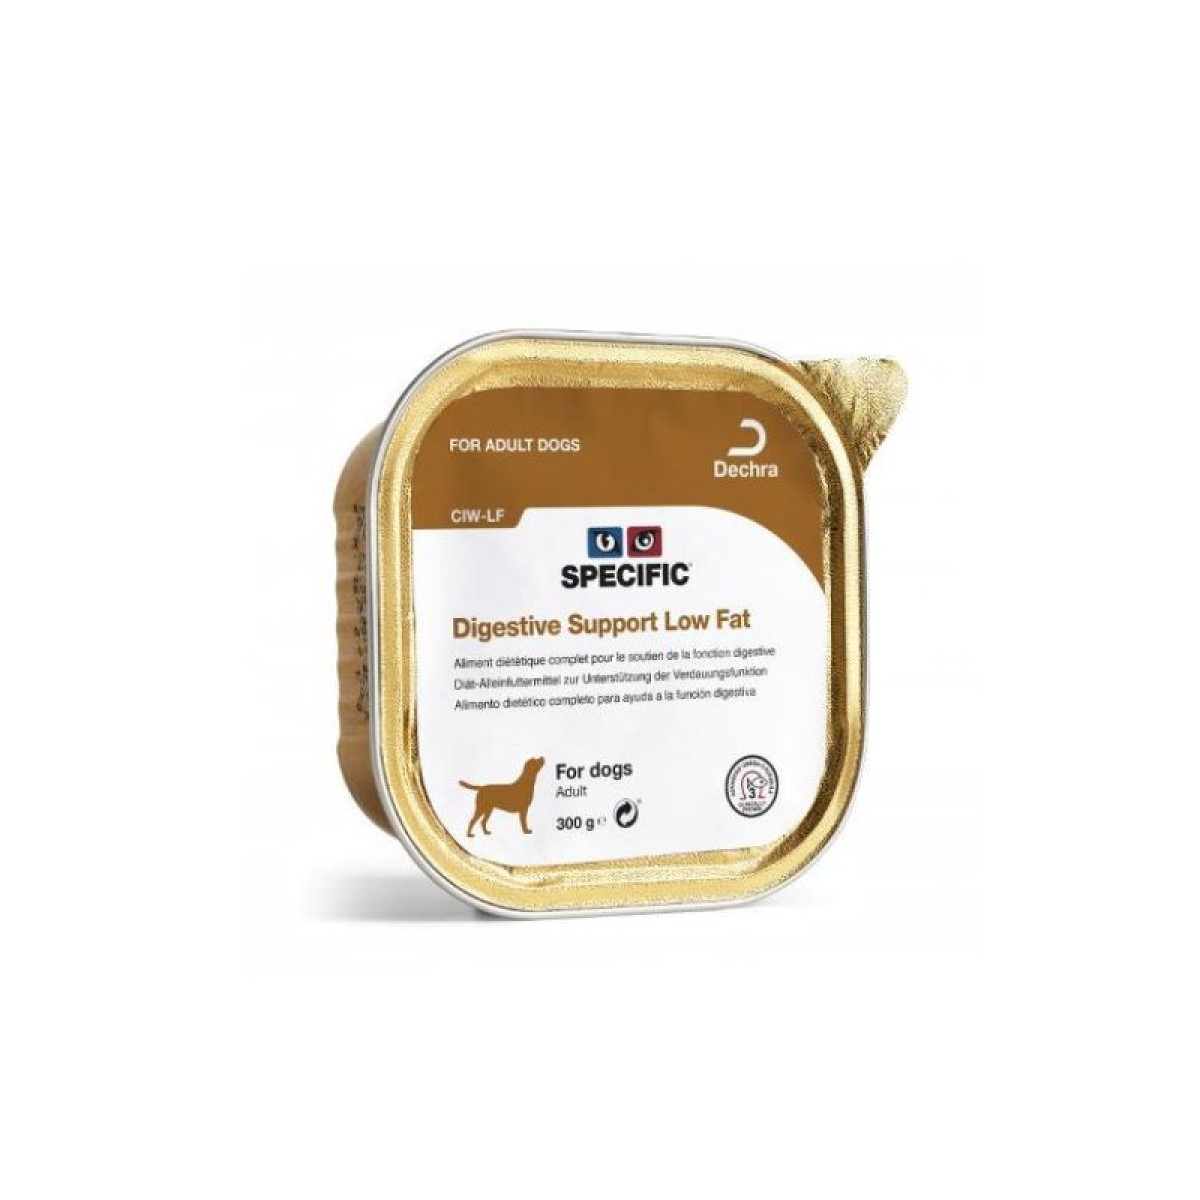 Pack de 6 tarrinas SPECIFIC Digestive Support Low Fat para perros